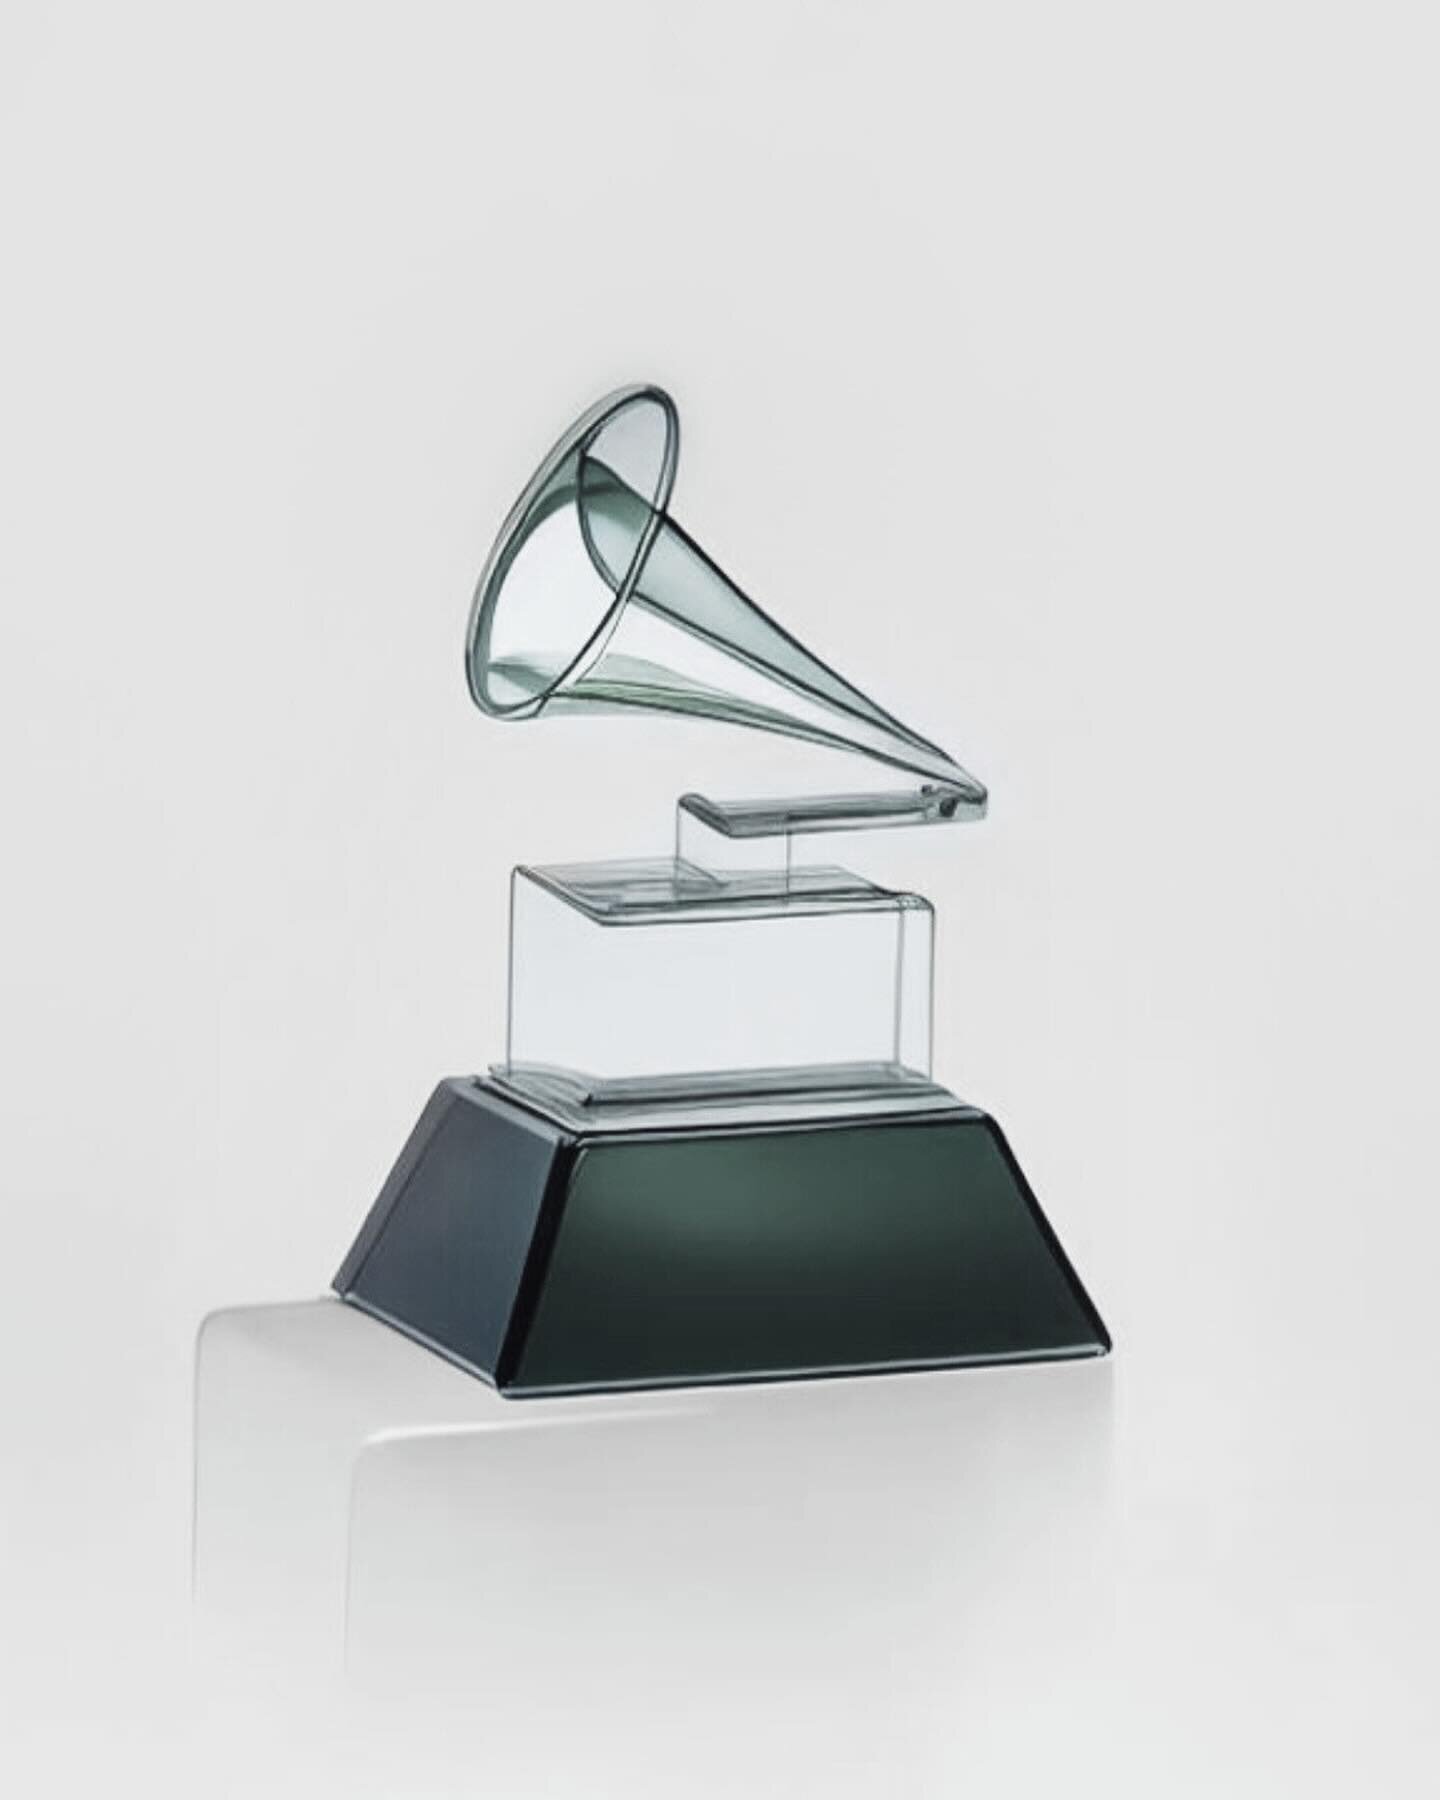 Have you ever wondered what it takes to be considered for a GRAMMY award? 🏆

As a firm representing multiple GRAMMY Award-nominated and winning artists, we understand the impact being recognized by the Recording Academy can have.

Swipe through to l